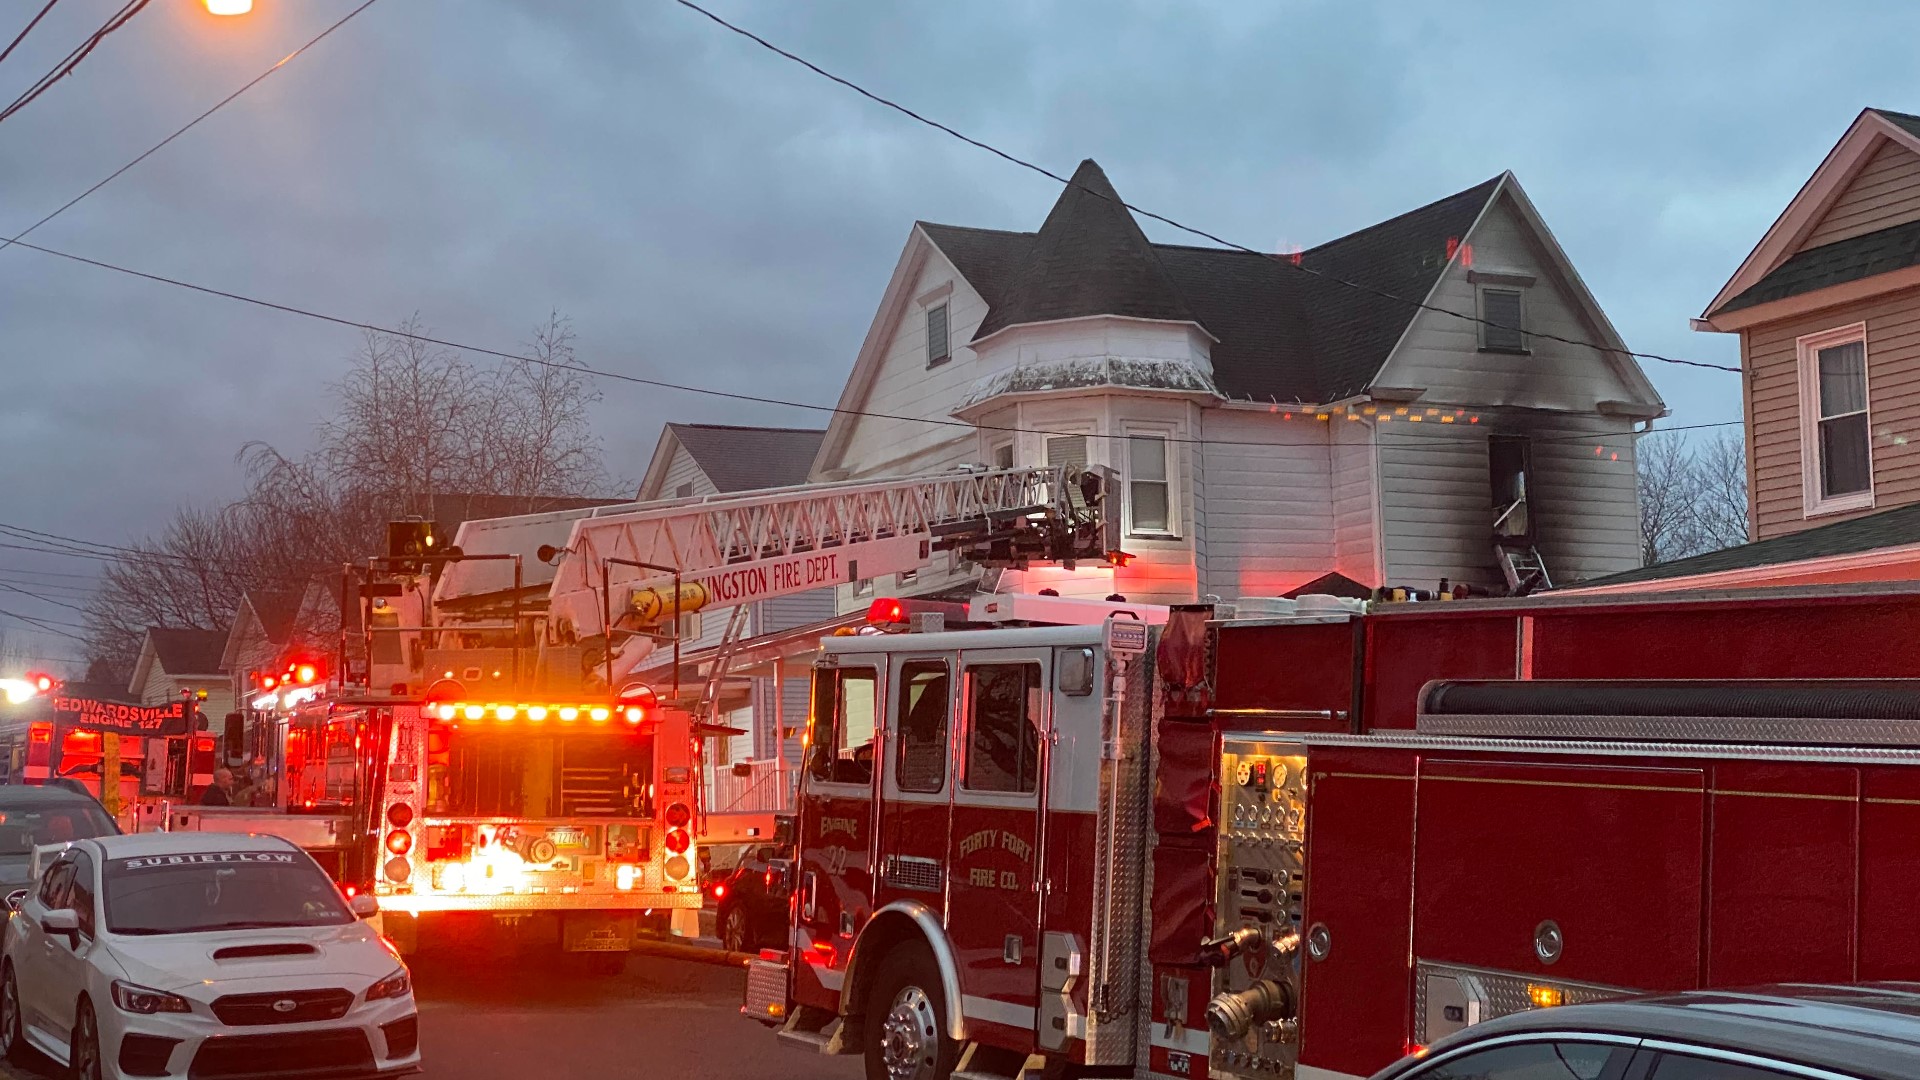 Flames broke out at the home on Green Street just before 6 a.m. Tuesday.